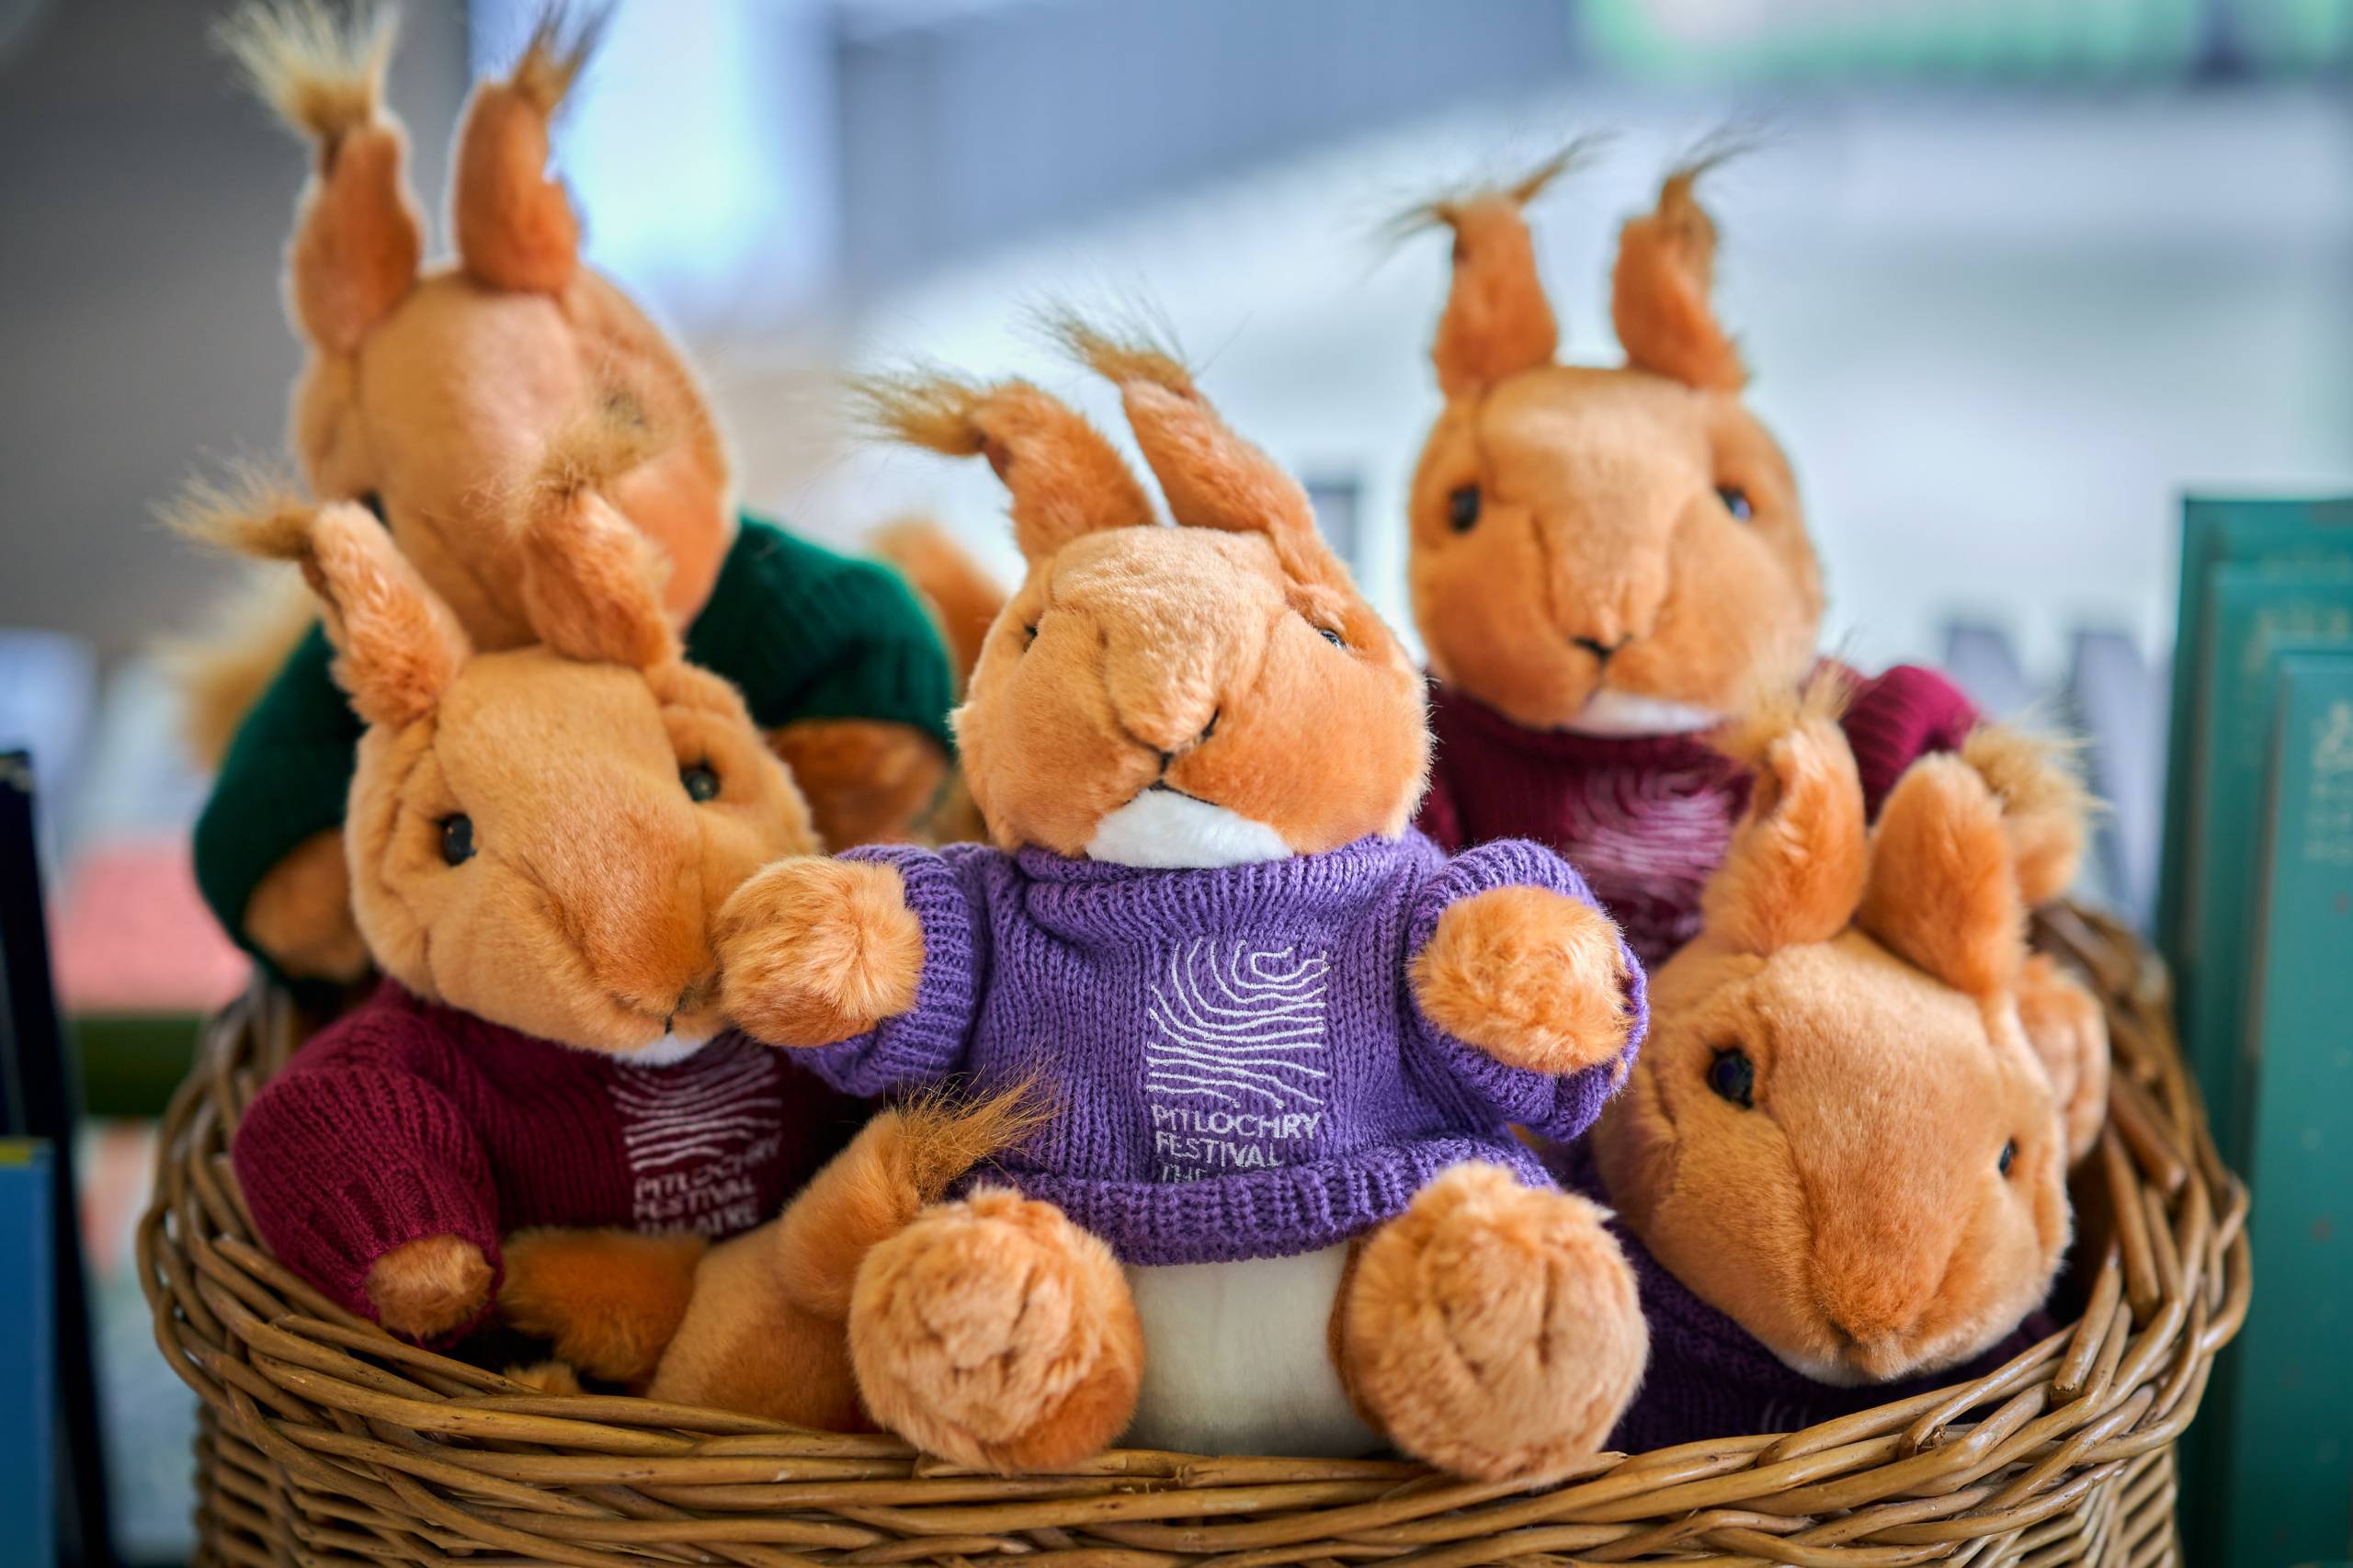 A basket of red squirrel soft toys with jumpers on with the writing 'pitlochry festival theatre'